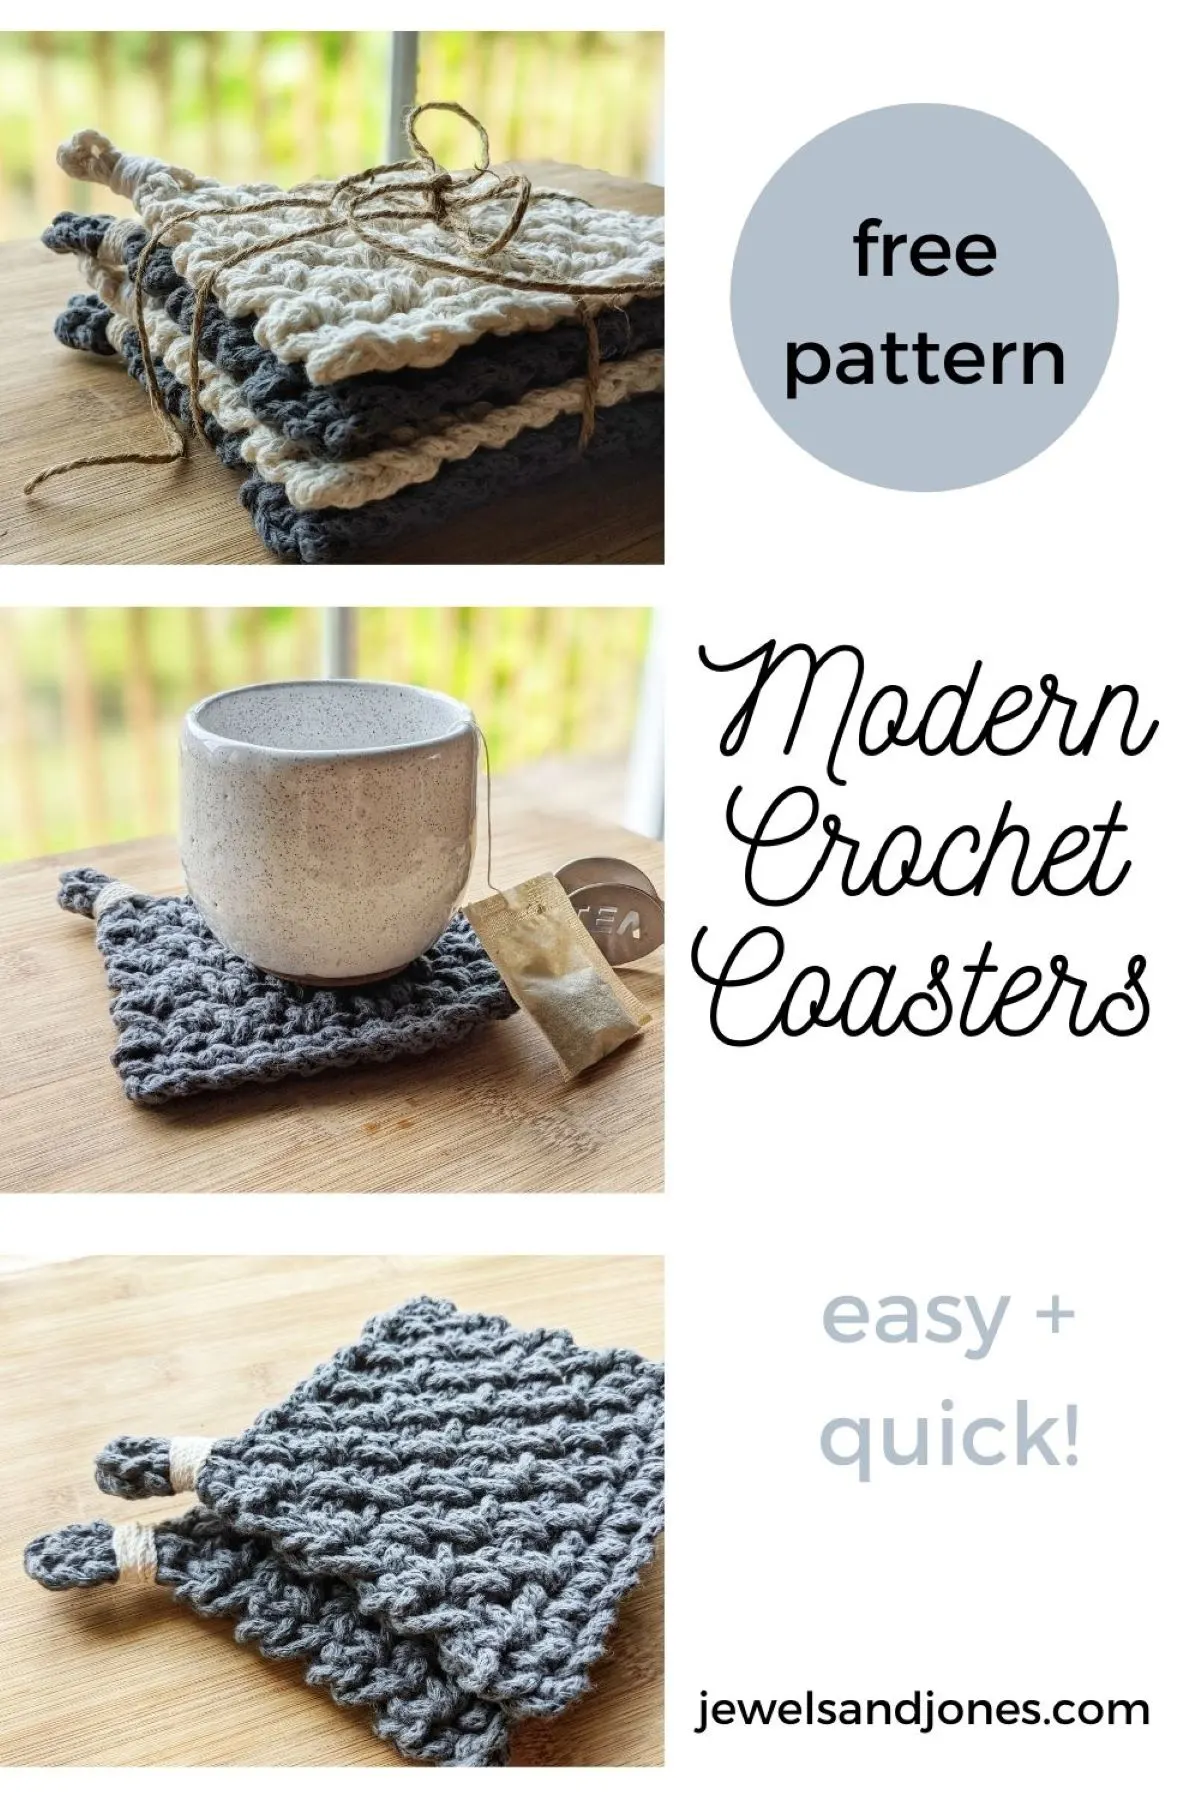 3 different pictures of the free crochet coaster pattern